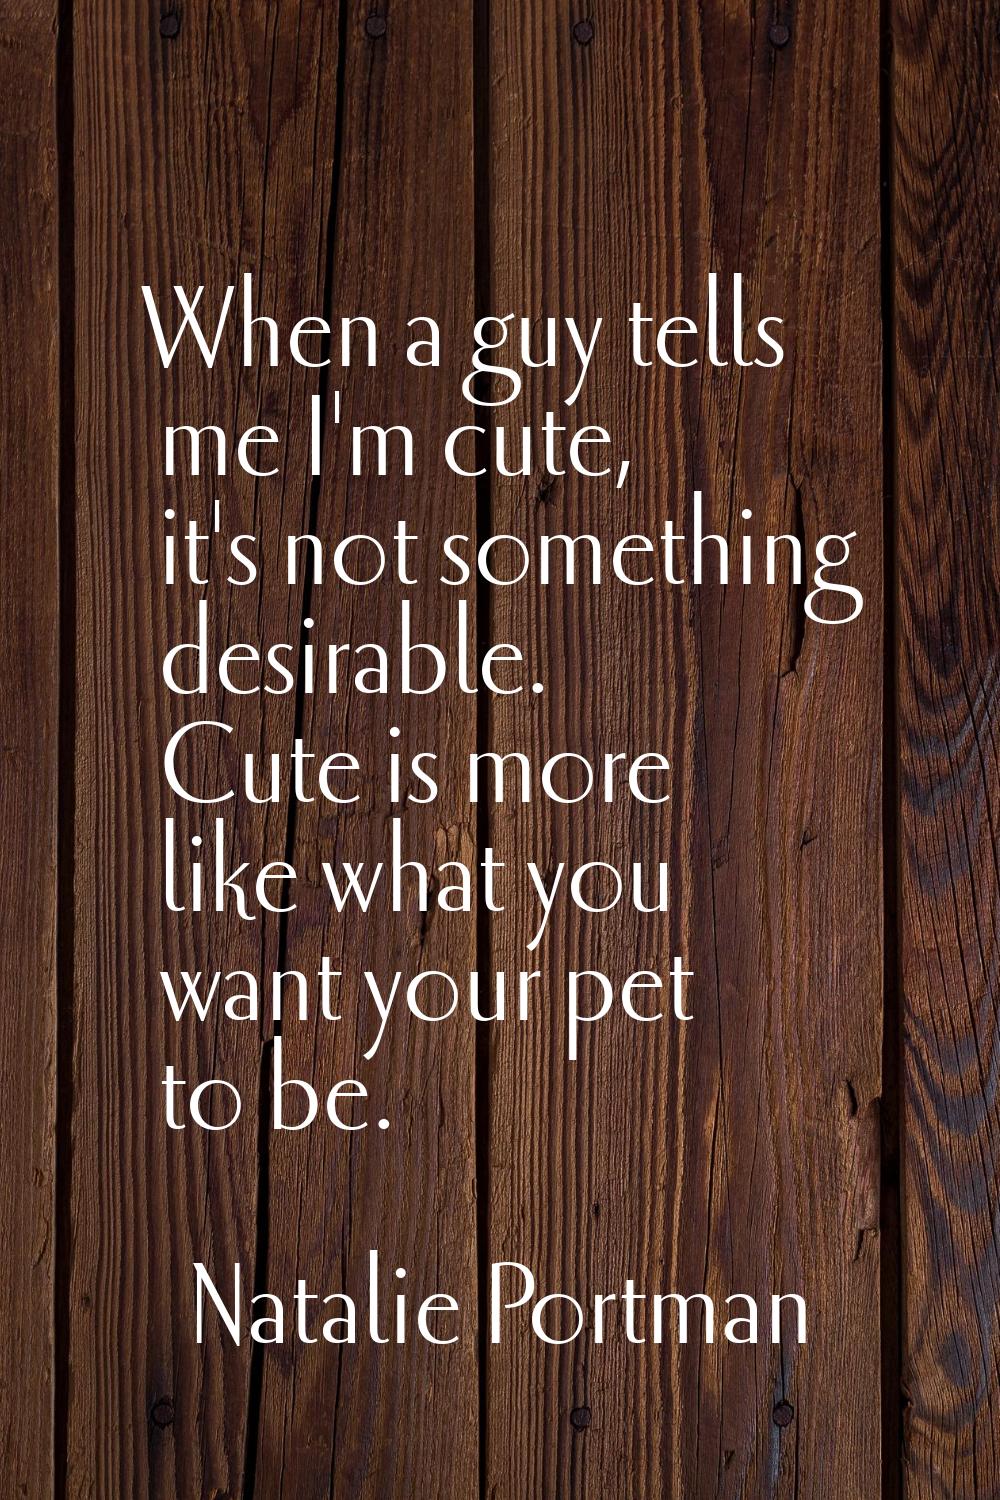 When a guy tells me I'm cute, it's not something desirable. Cute is more like what you want your pe